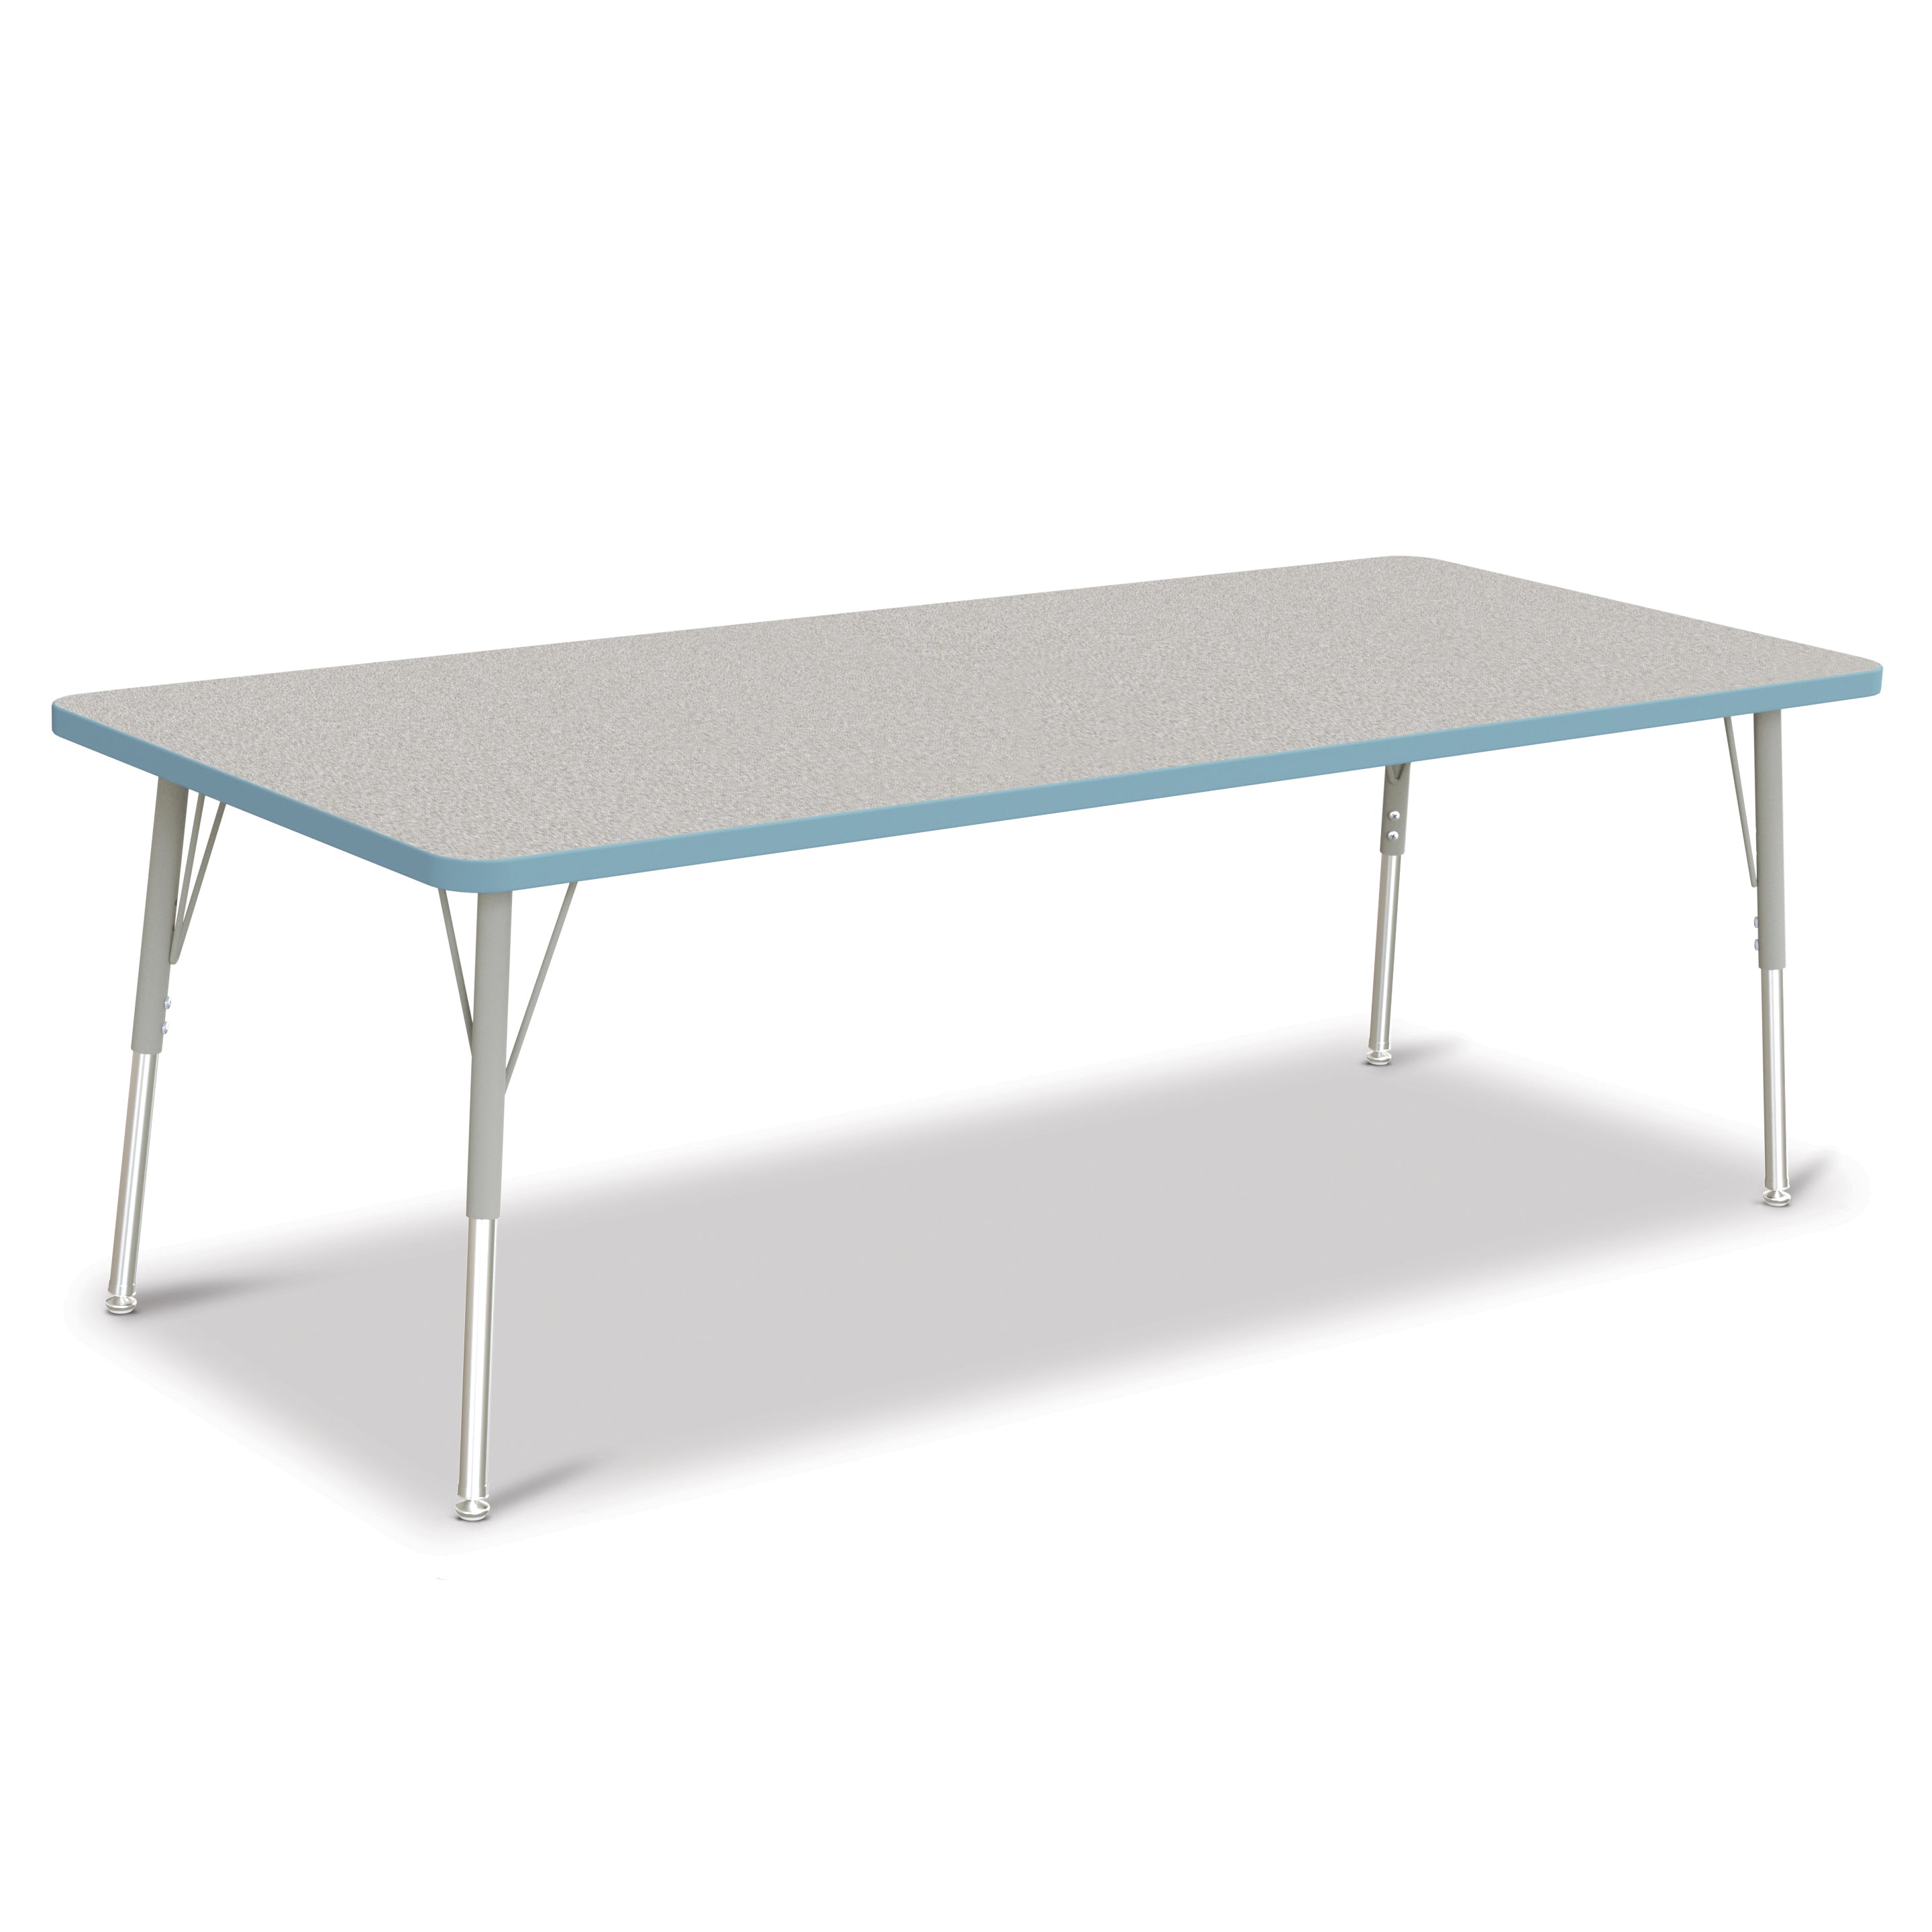 6413JCA131, Berries Rectangle Activity Table - 30" X 72", A-height - Freckled Gray/Coastal Blue/Gray